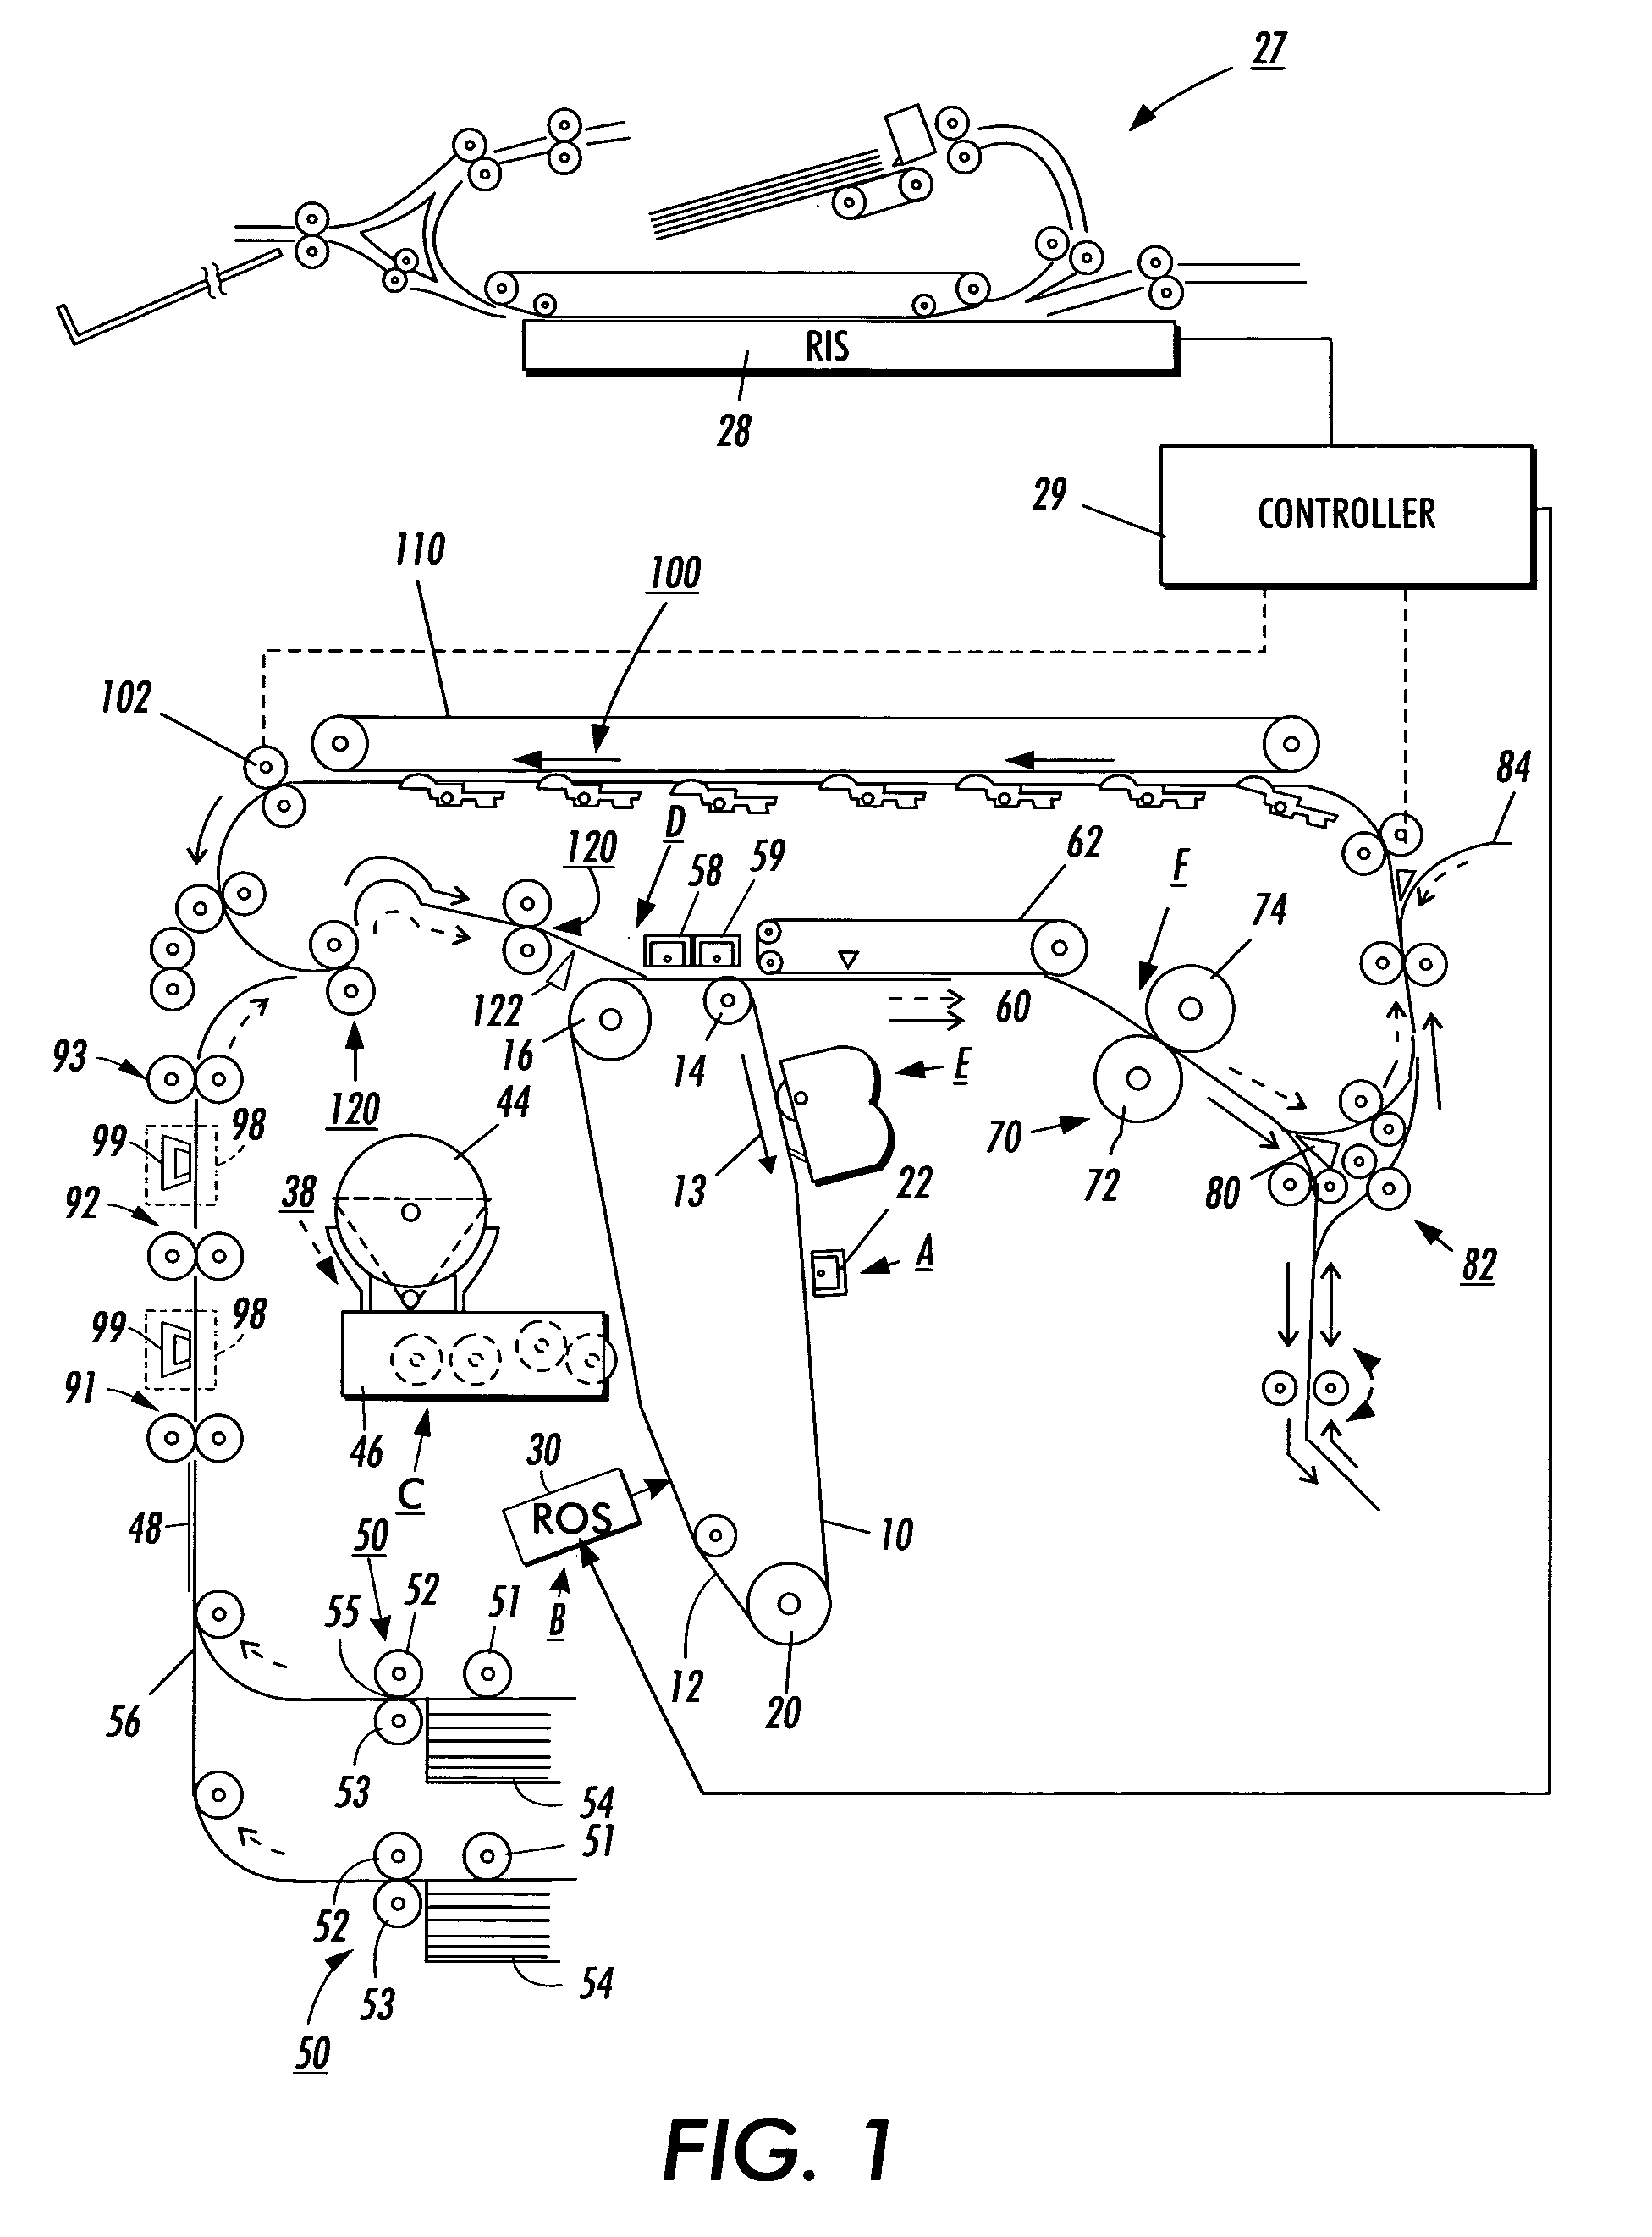 Paper path calibration and diagnostic system